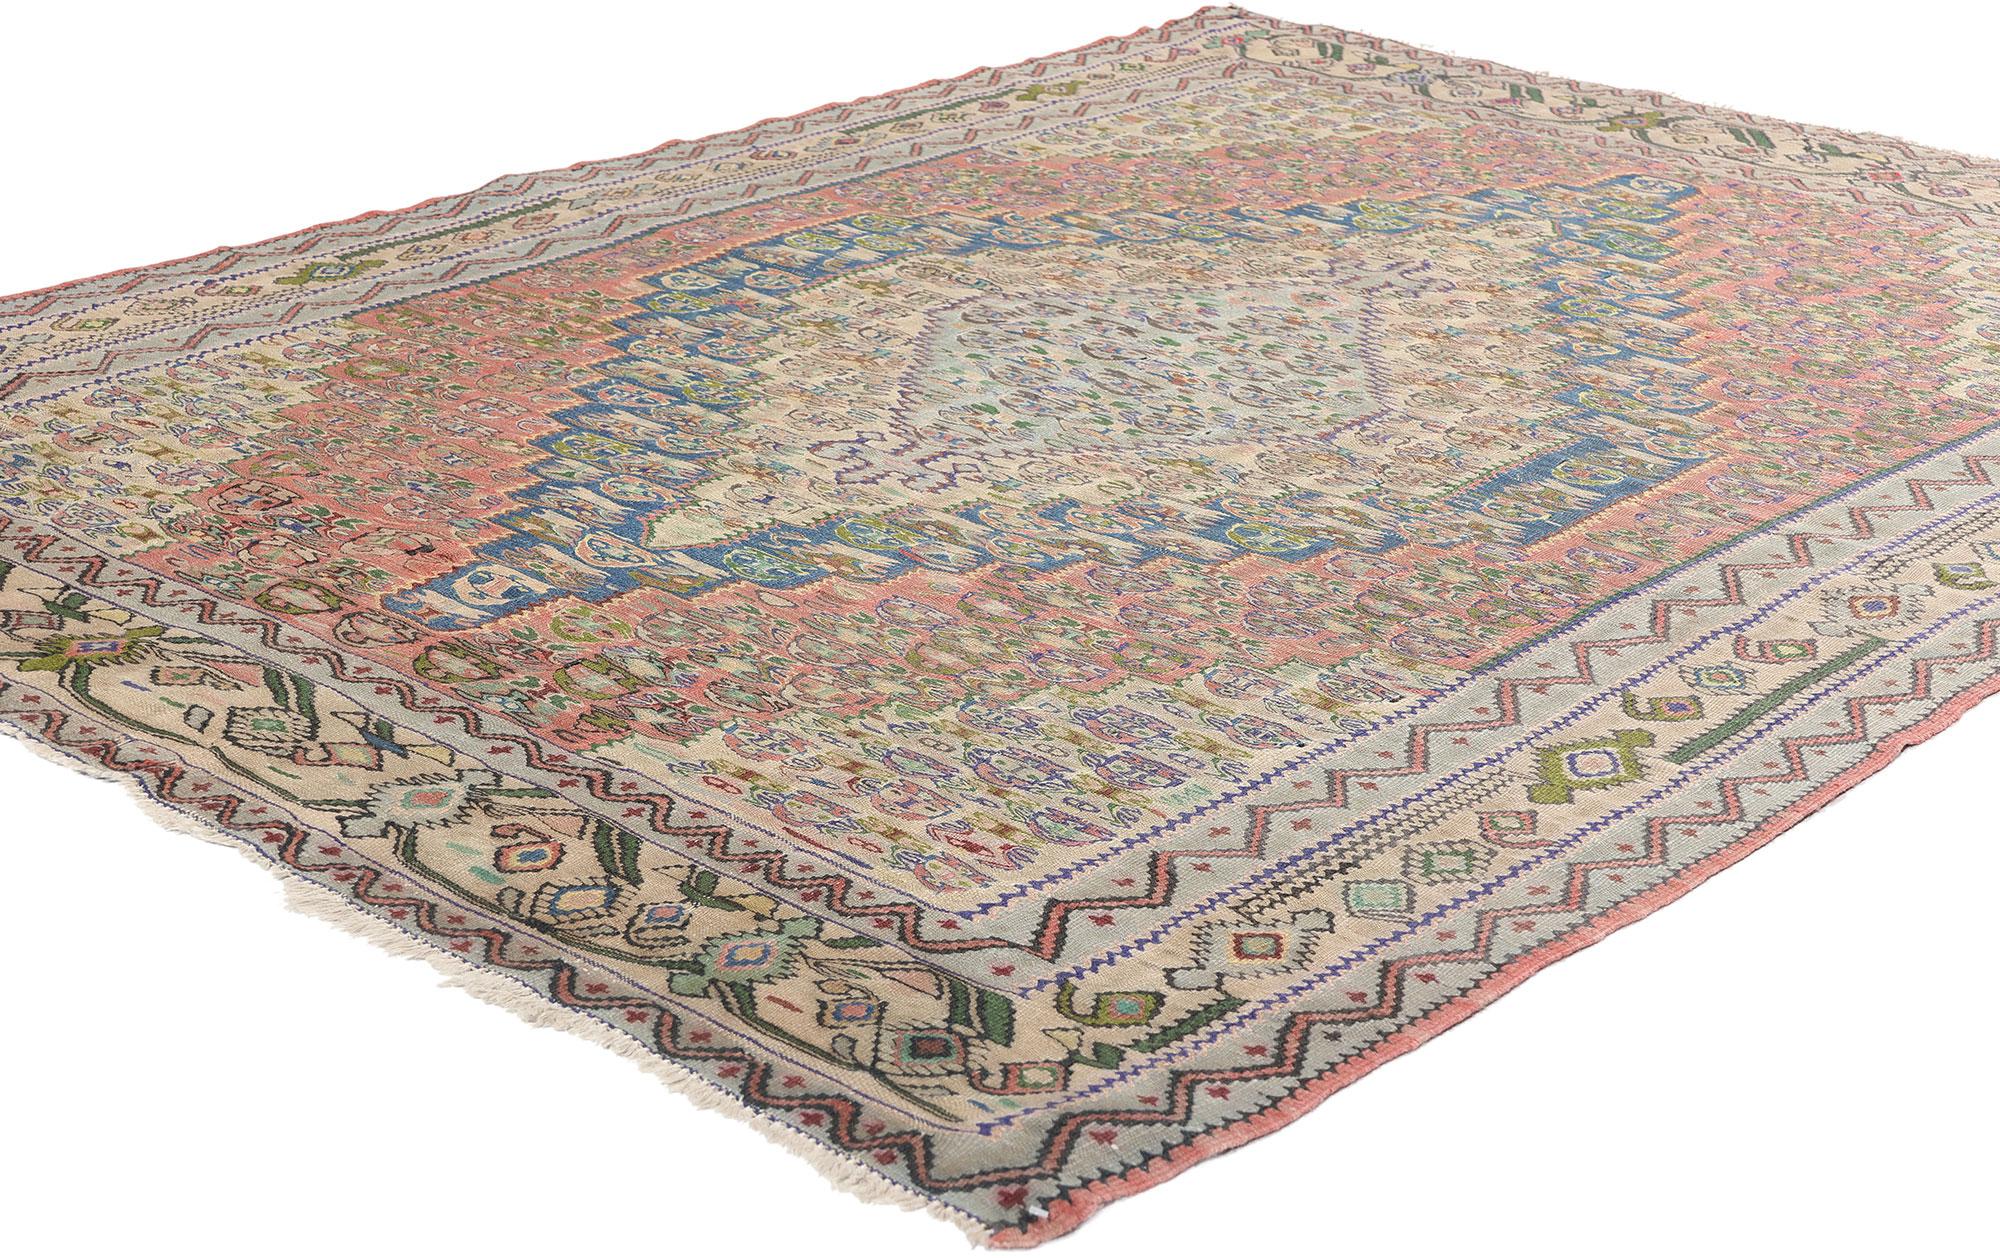 78213 Vintage Persian Floral Bijar Kilim Rug, 04'10 x 06'00. 
Handwoven wool Persian Bijar floral kilim rugs are exquisite works of art that embody the rich heritage of Persian craftsmanship. These rugs are meticulously crafted by skilled artisans